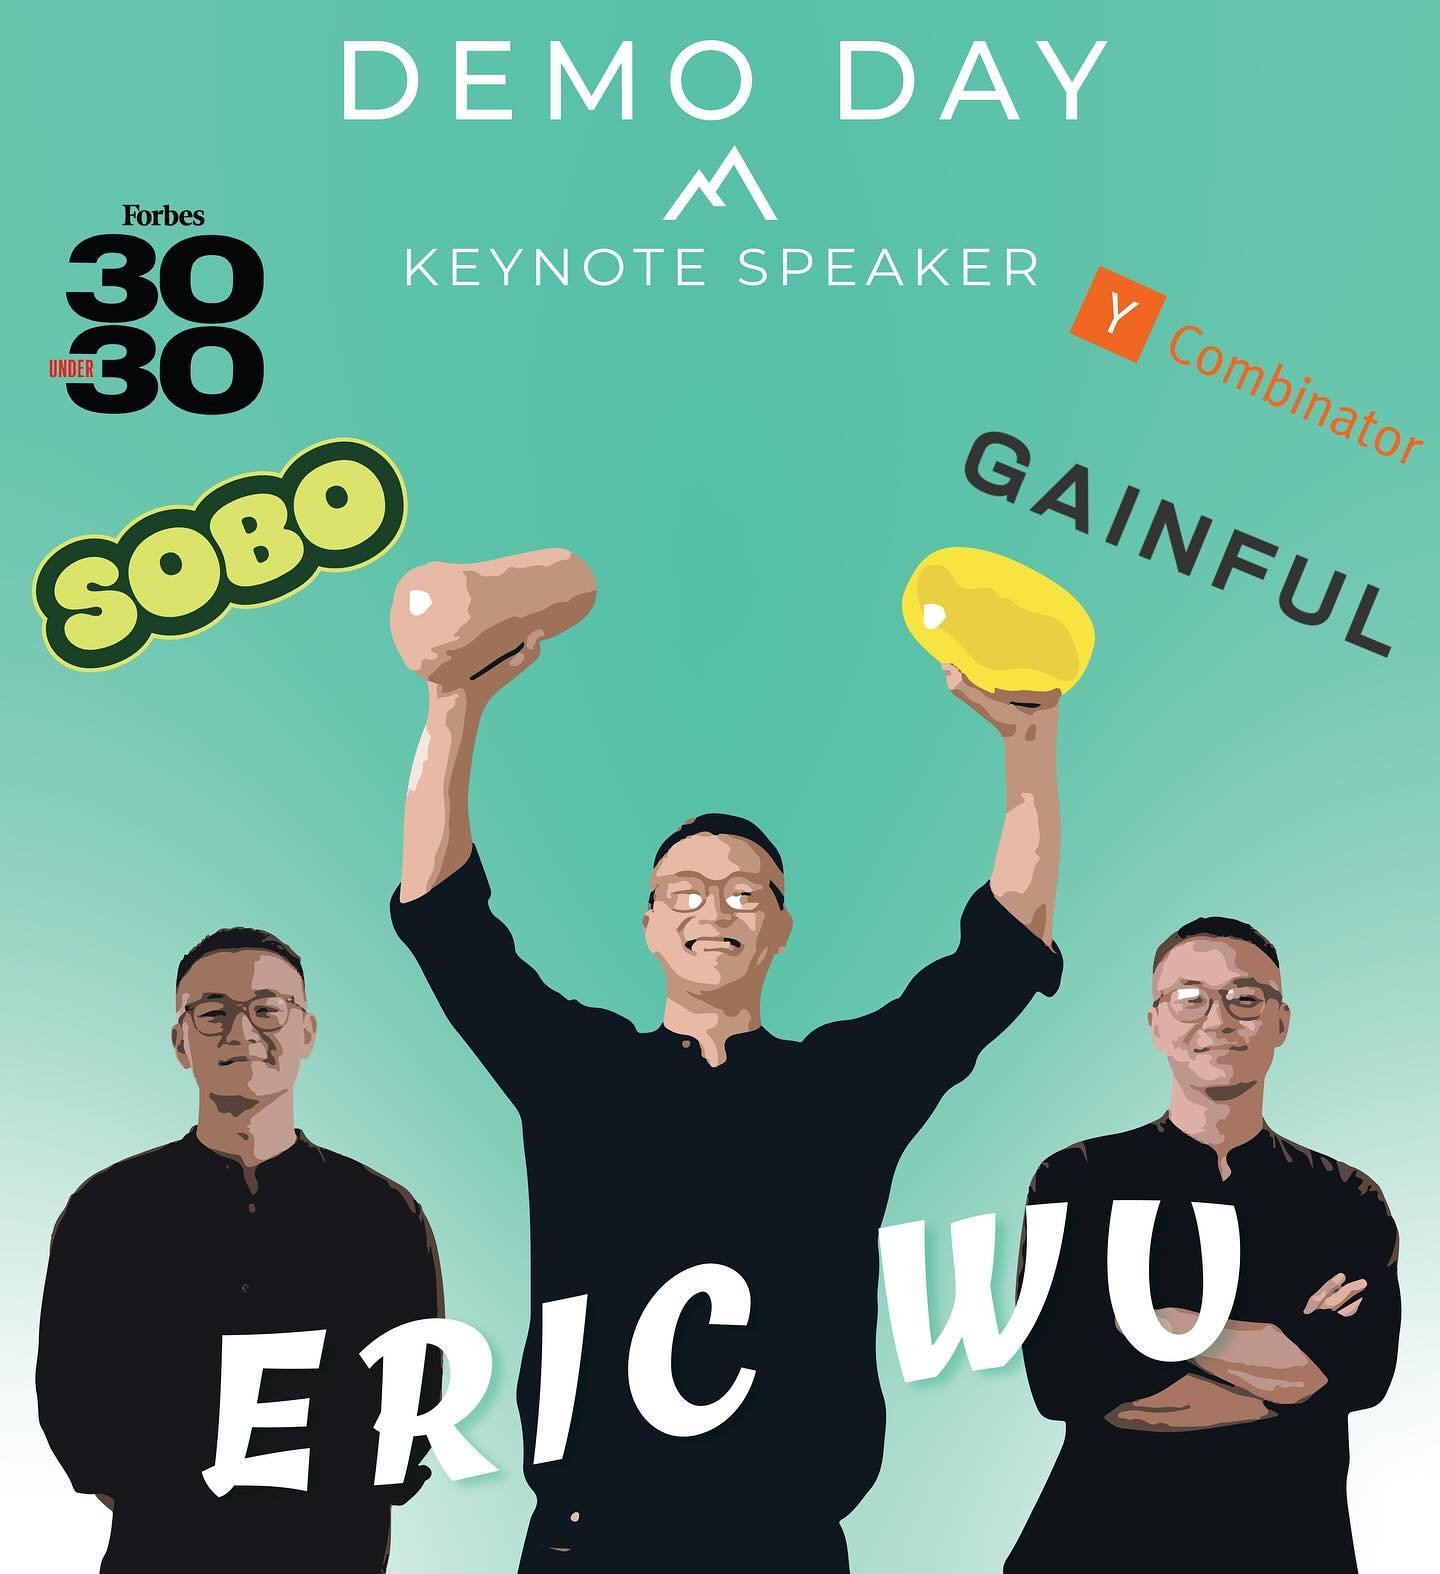 INTRODUCING OUR DEMO DAY KEY NOTE SPEAKER FOR S&rsquo;24:

Eric Ji Sun Wu is the founder of Gainful, a NYC-based startup which makes personalized sports nutrition products. Gainful has raised $20M to date (Y Combinator, celebrity athletes etc) and is